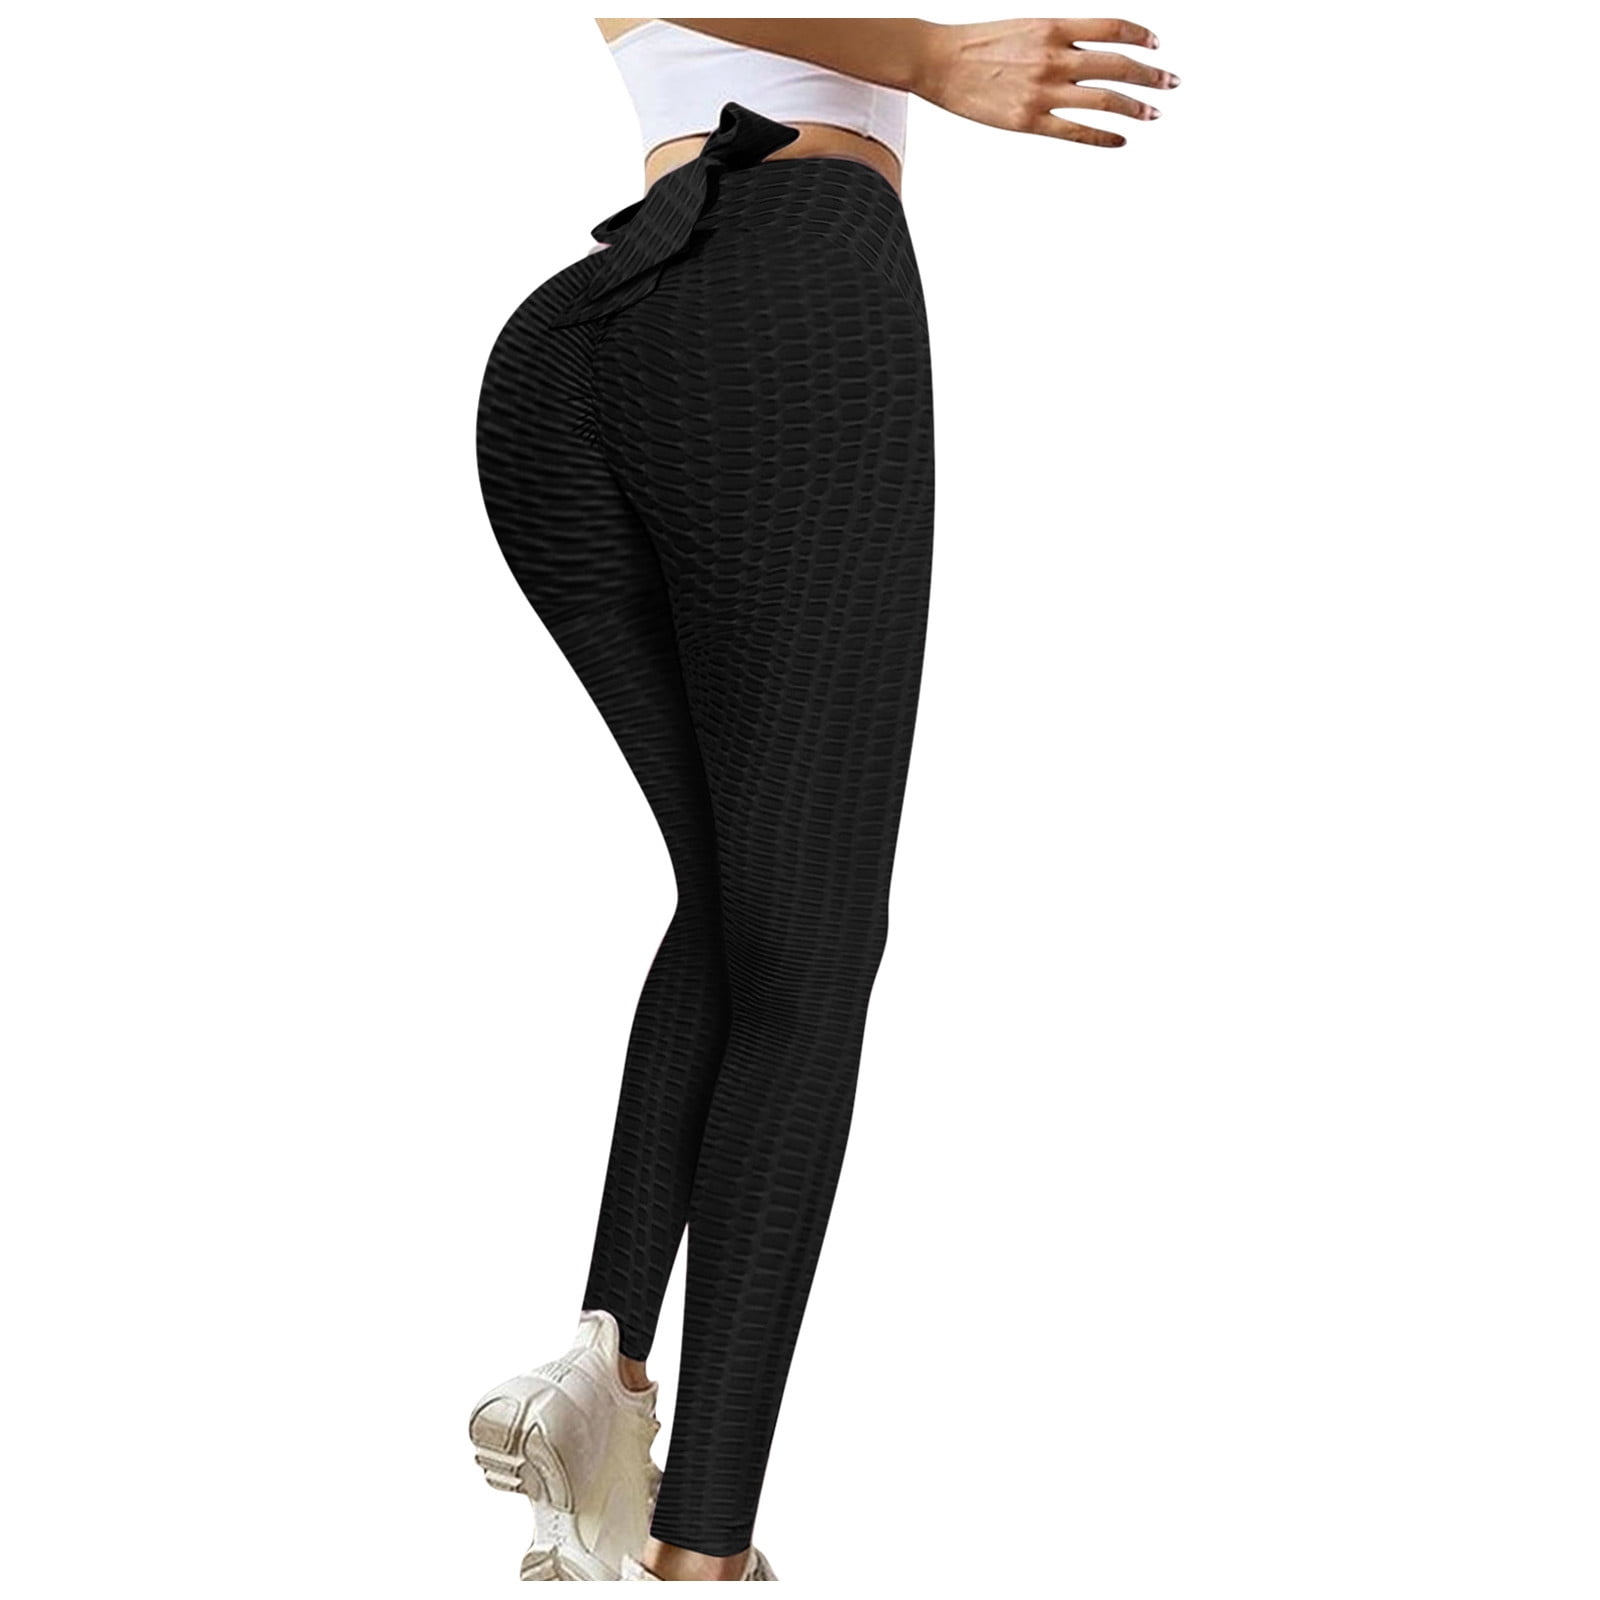 Babysbule Womens Yoga Pants Clearance Women Fitness Exercise Stretch High  Waist Skinny Sexy Suckled Pocket Yoga Pants 